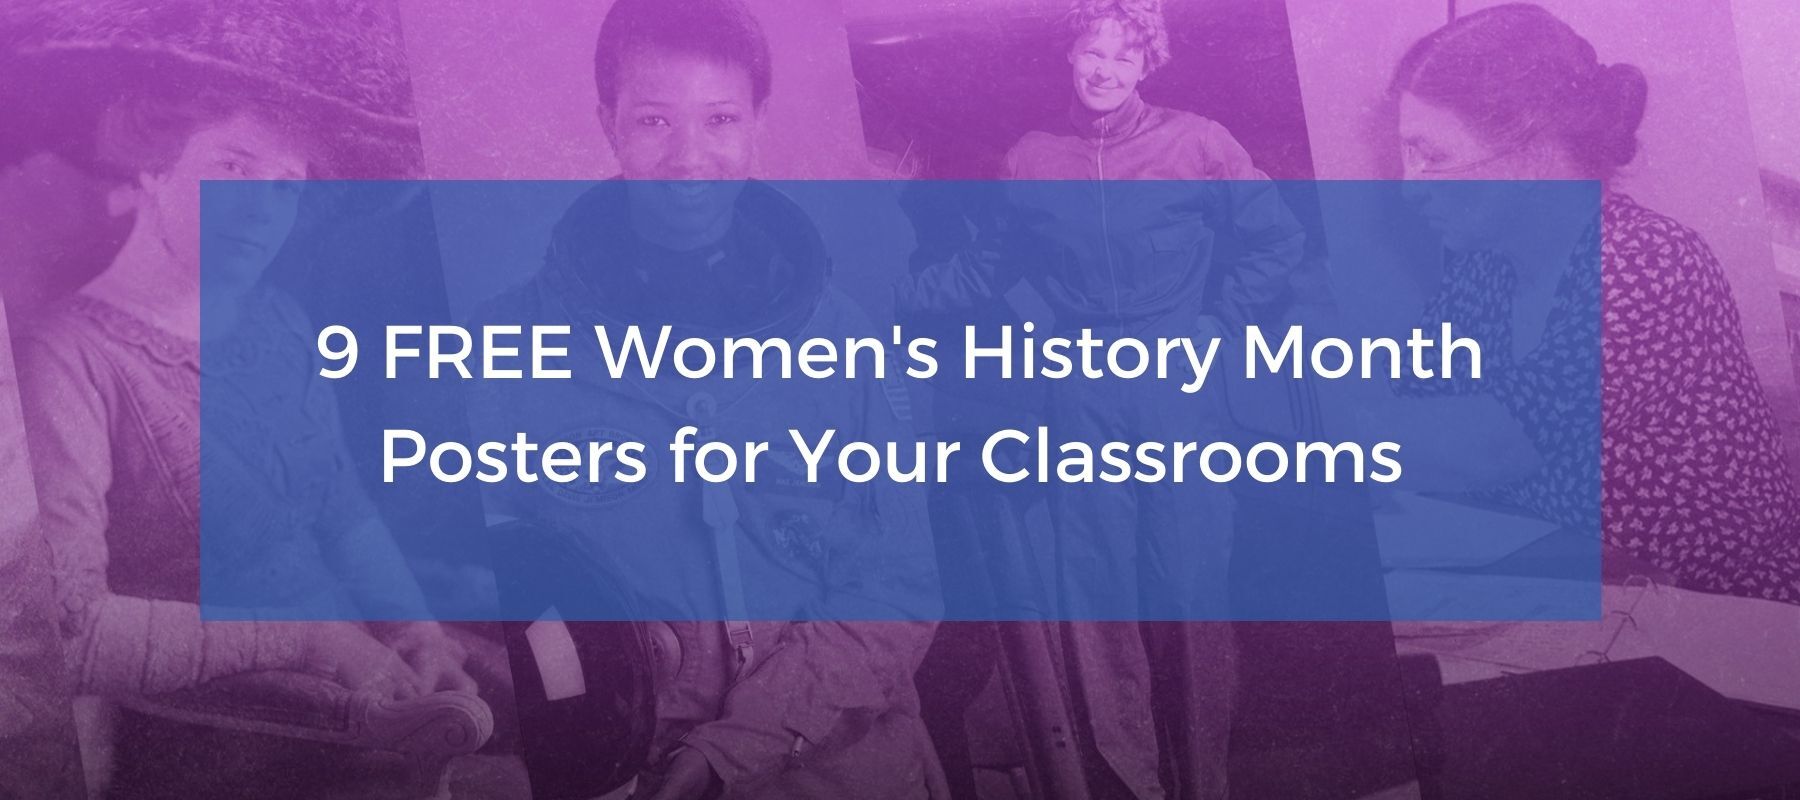 9-free-women-s-history-month-posters-for-your-classrooms